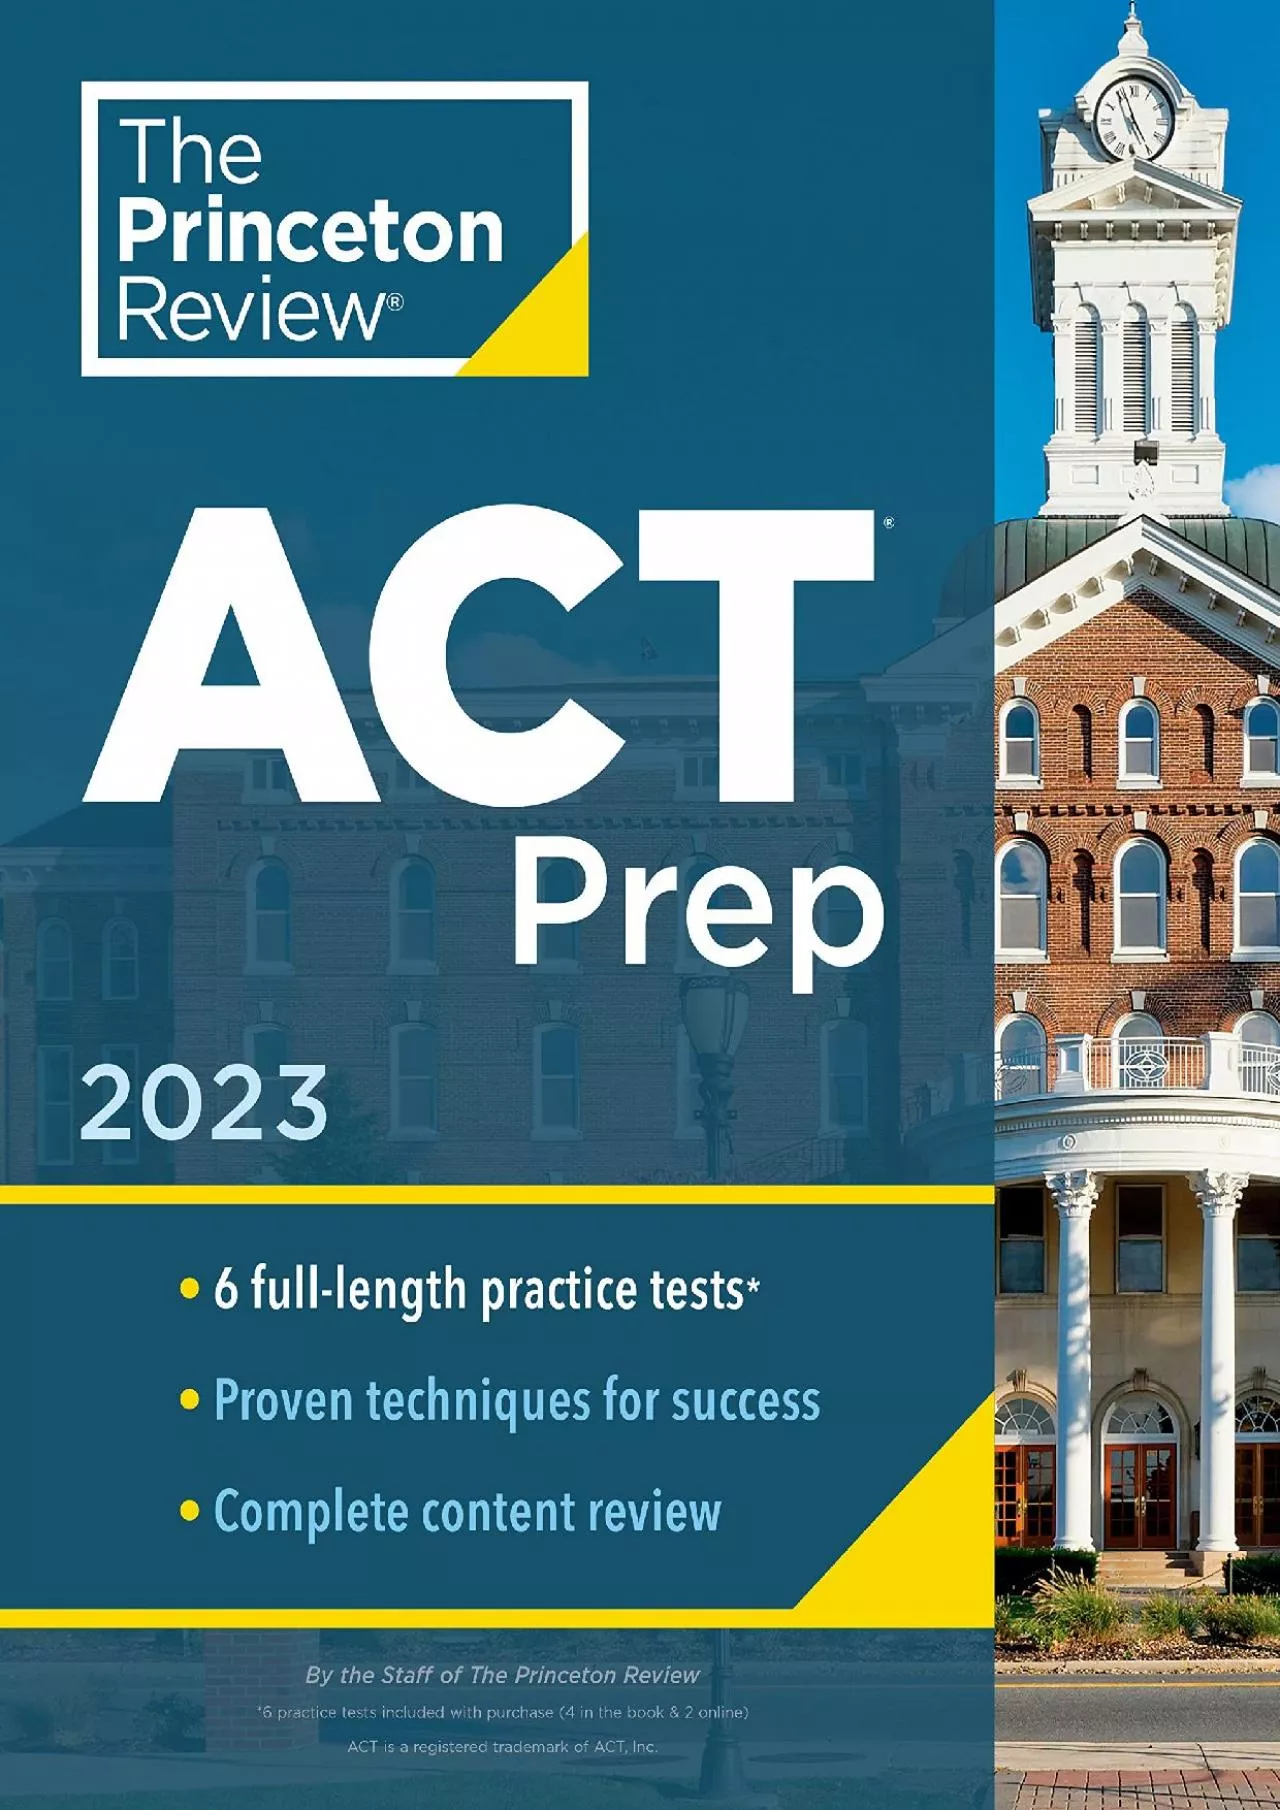 [READ] Princeton Review ACT Prep, 2023: 6 Practice Tests + Content Review + Strategies